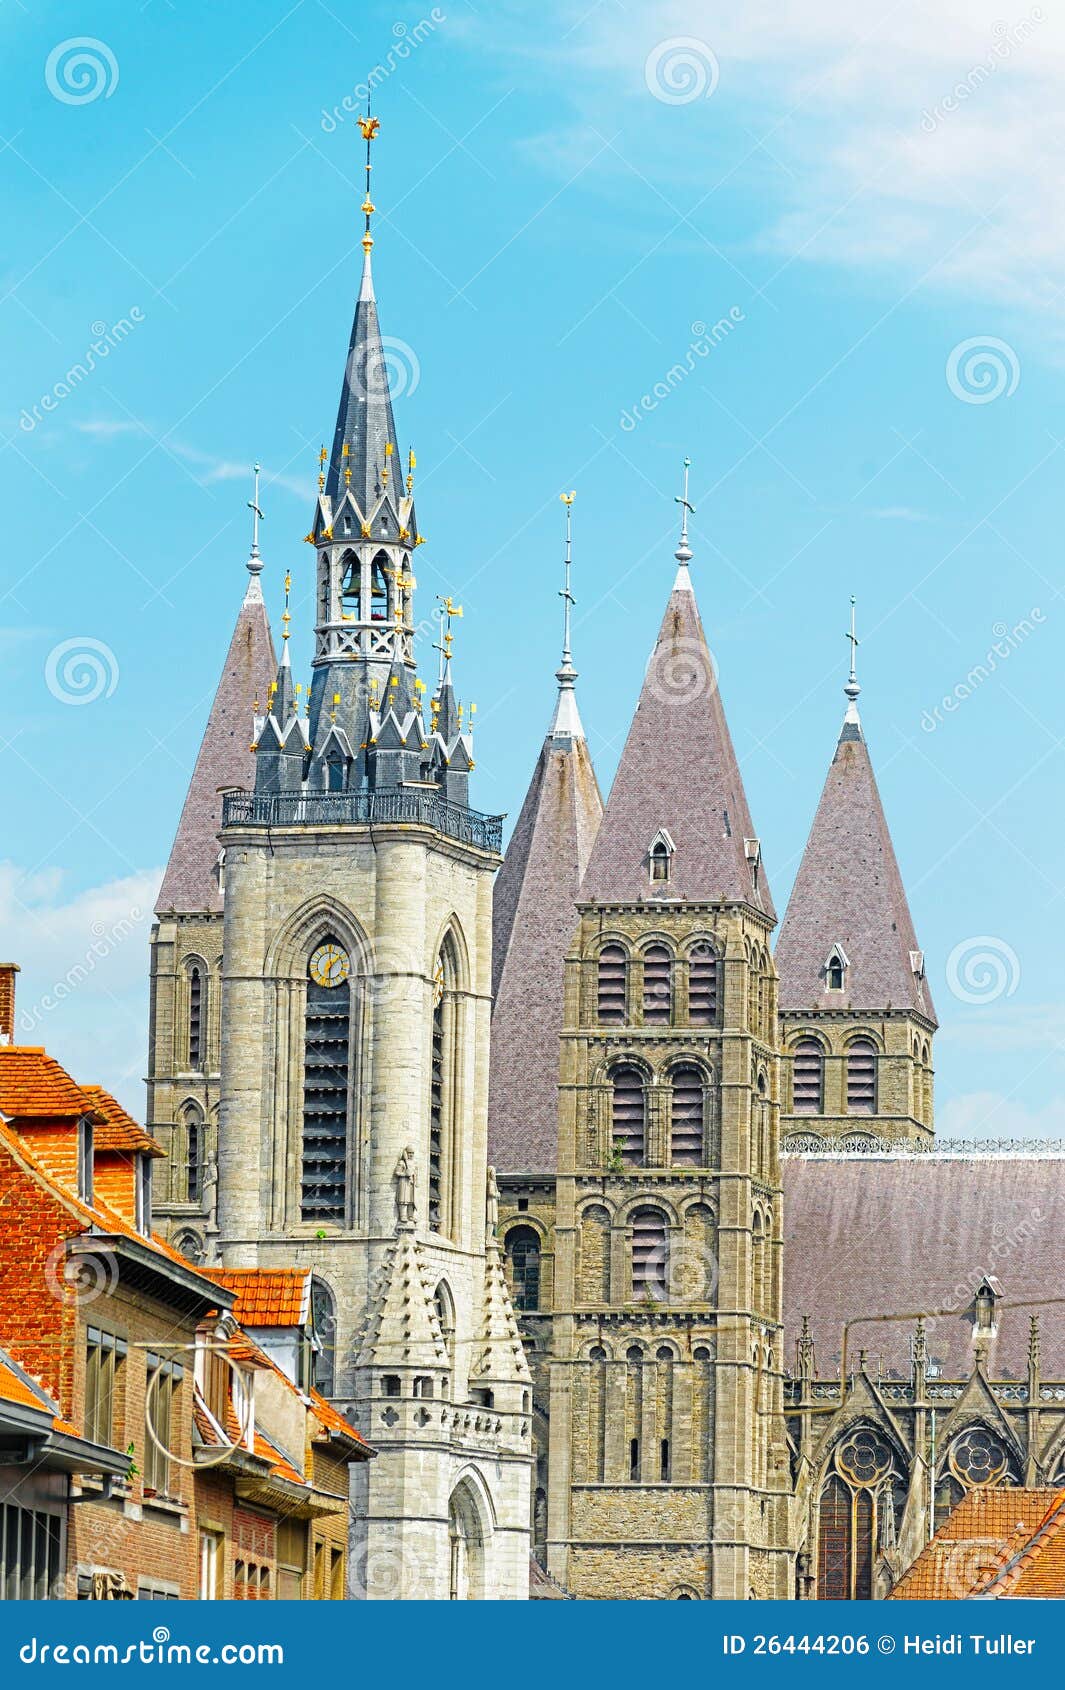 belfry and cathedral of tournai, belgium